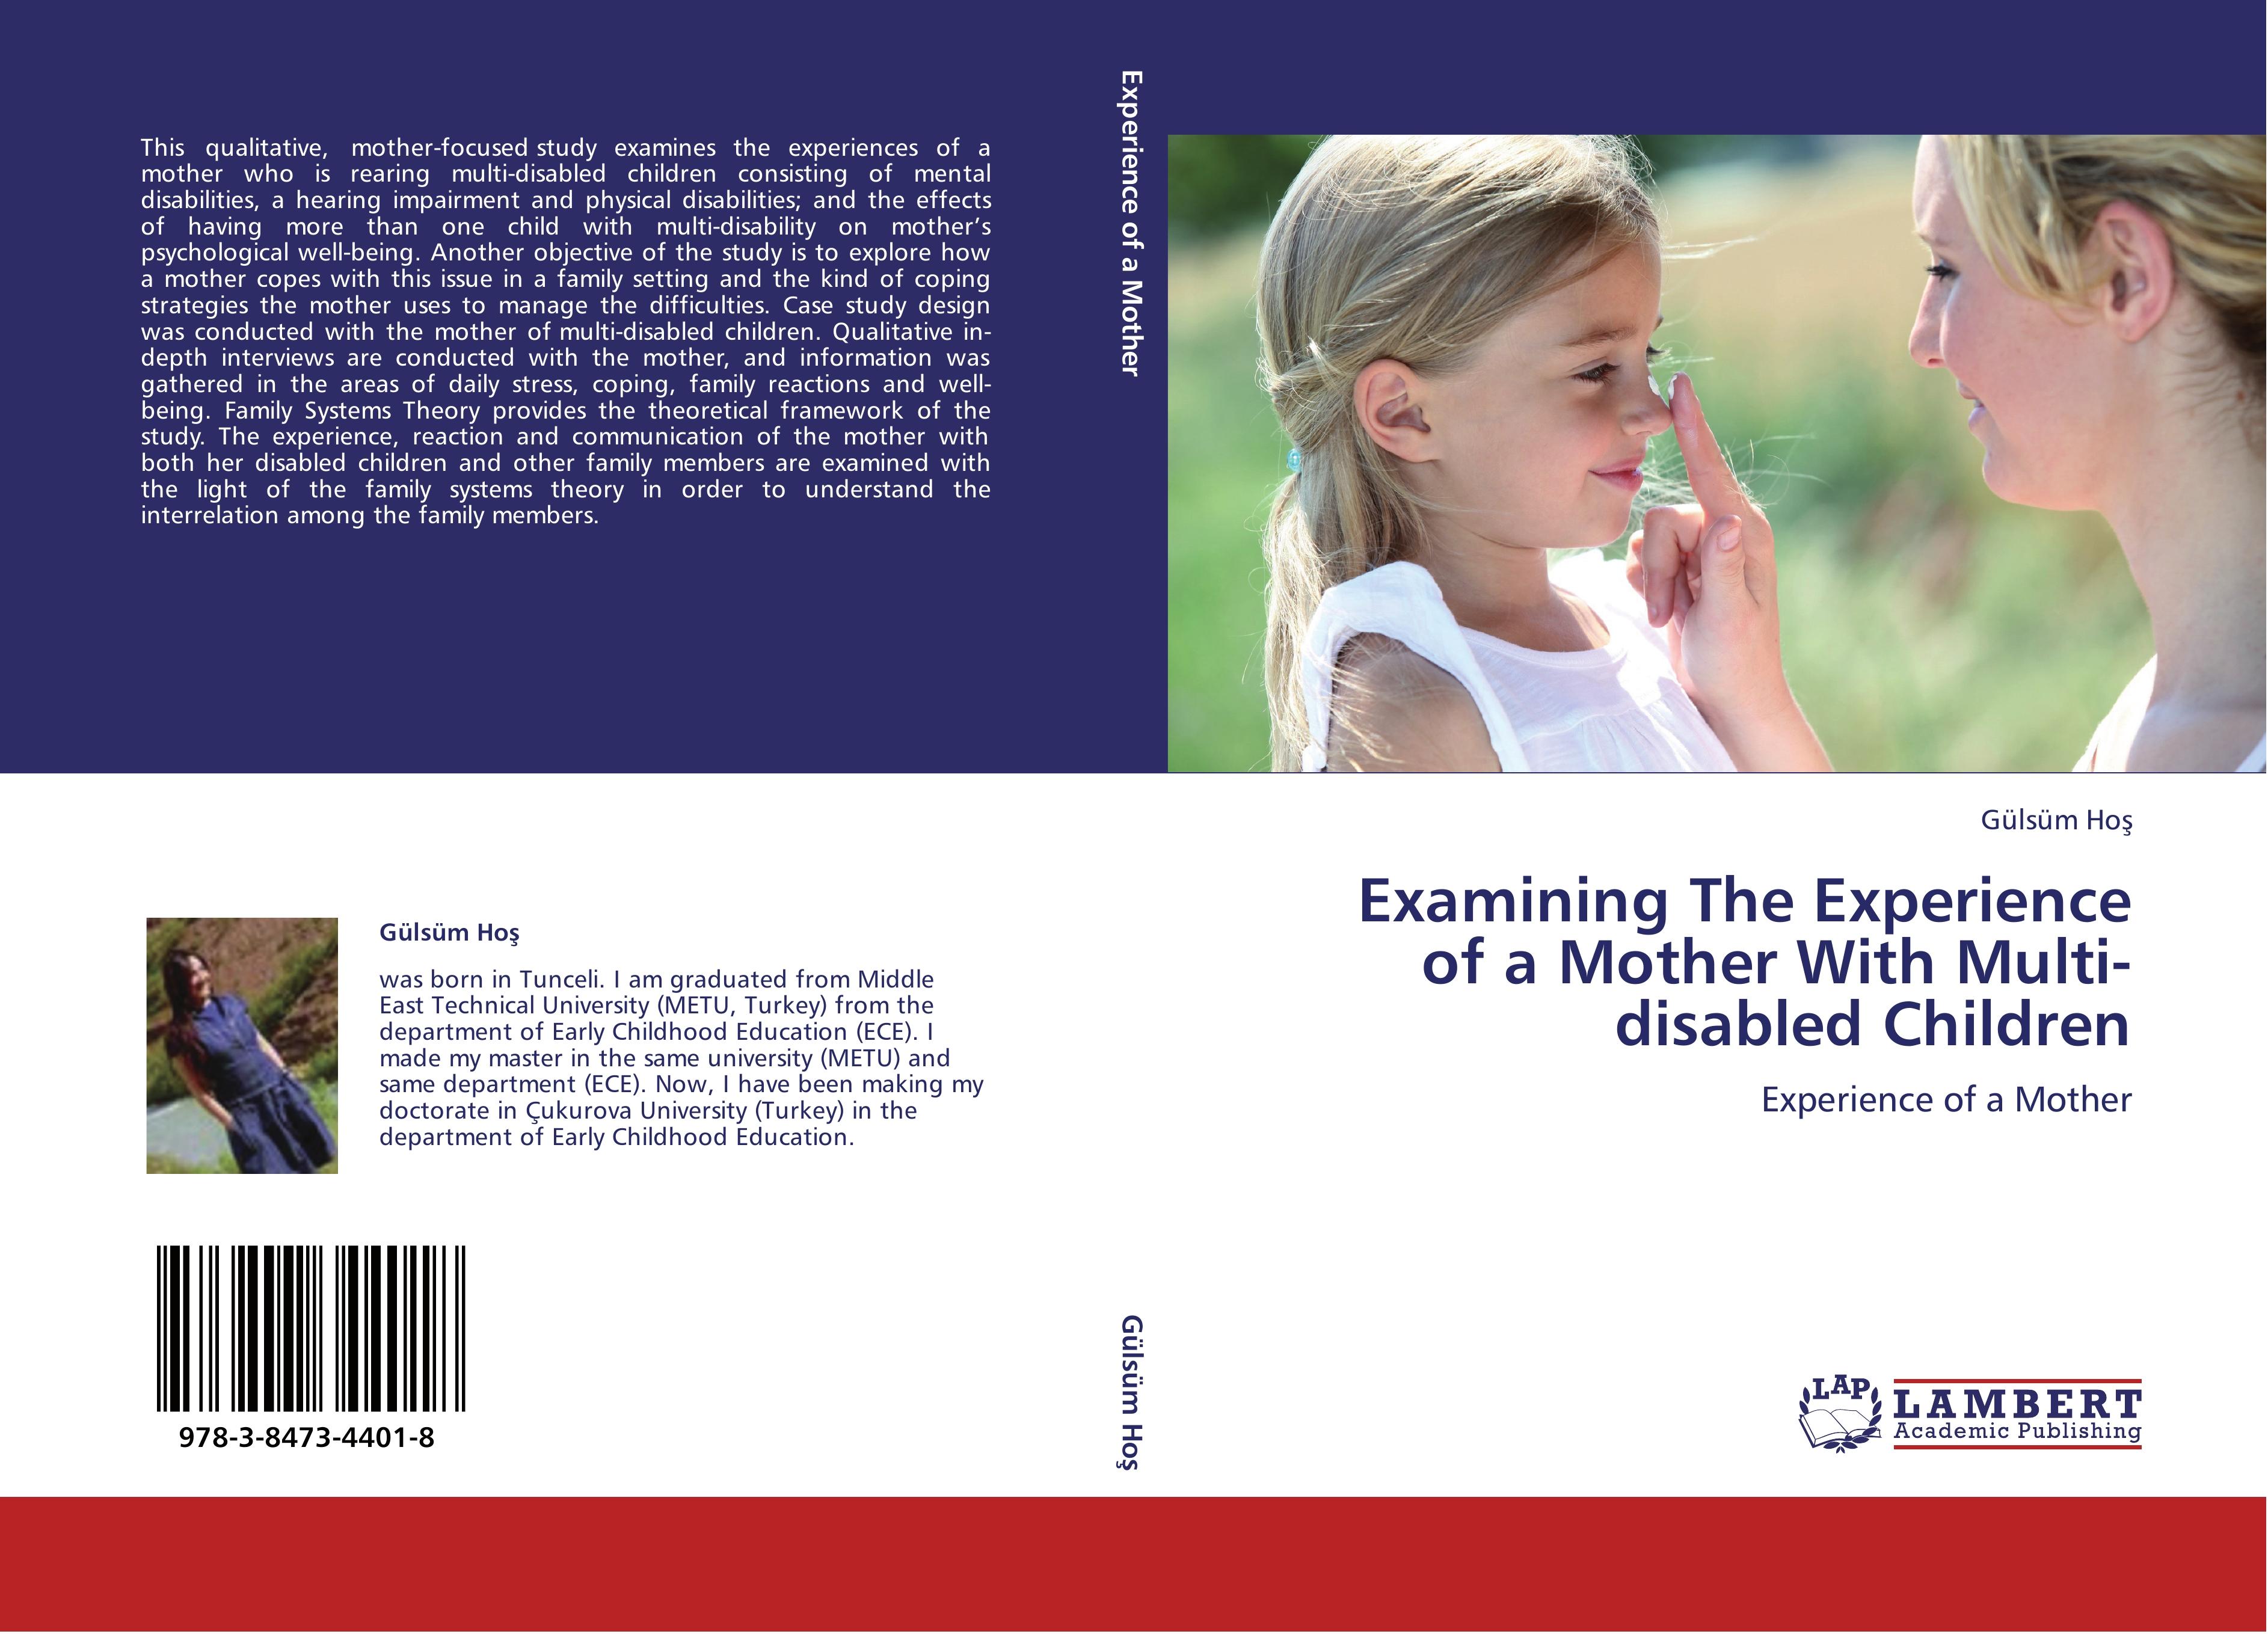 Examining The Experience of a Mother With Multi-disabled Children / Experience of a Mother / Gülsüm Ho¿ / Taschenbuch / Paperback / 156 S. / Englisch / 2012 / LAP LAMBERT Academic Publishing - Ho¿, Gülsüm